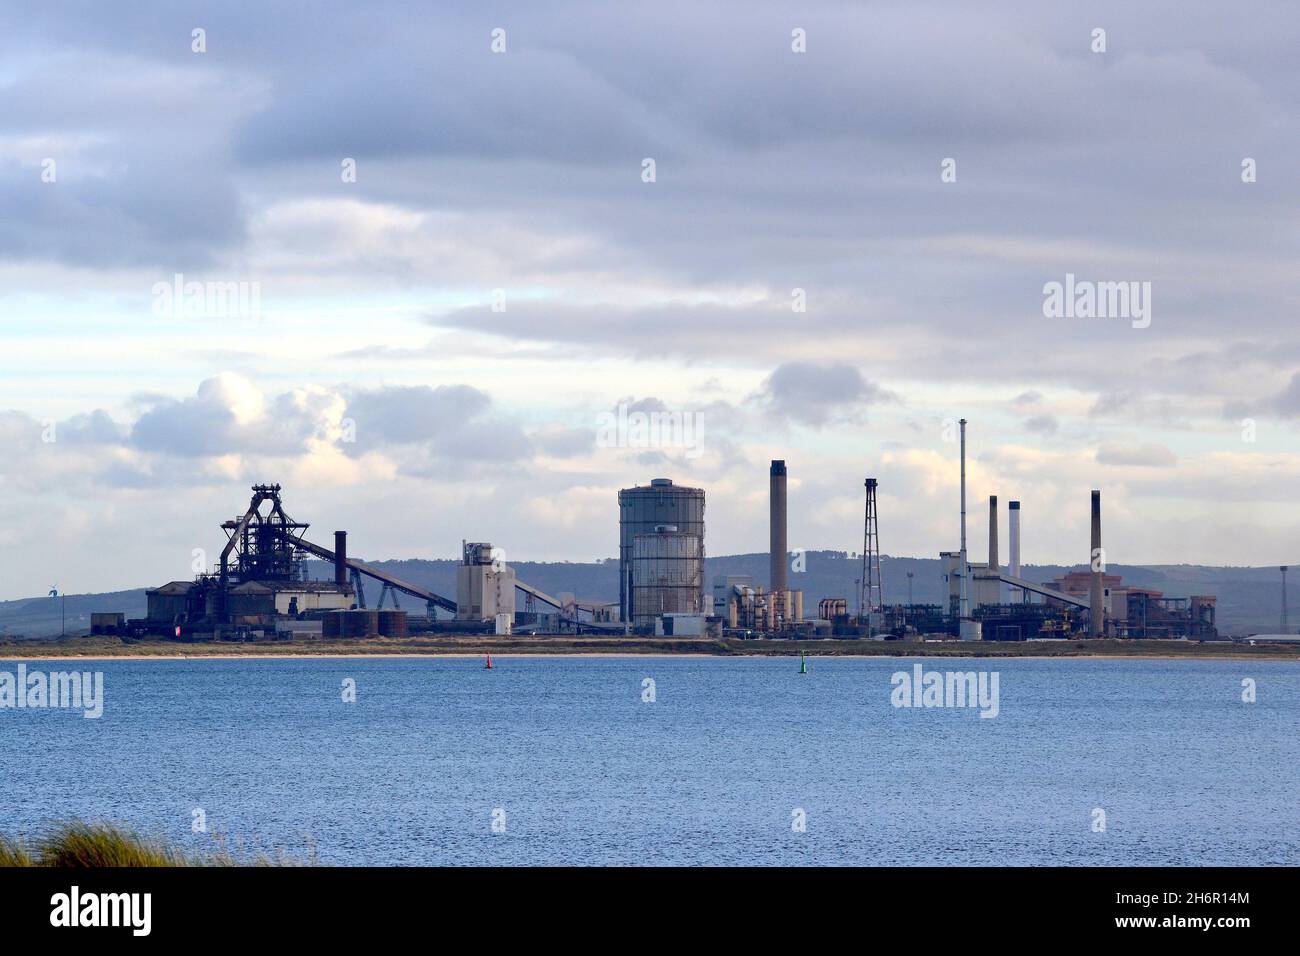 Former Redcar Steelworks site now owned by TVCA for redevelopment as part of Teesside Freeport and future Net Zero Teesside Carbon Capture site. Stock Photo